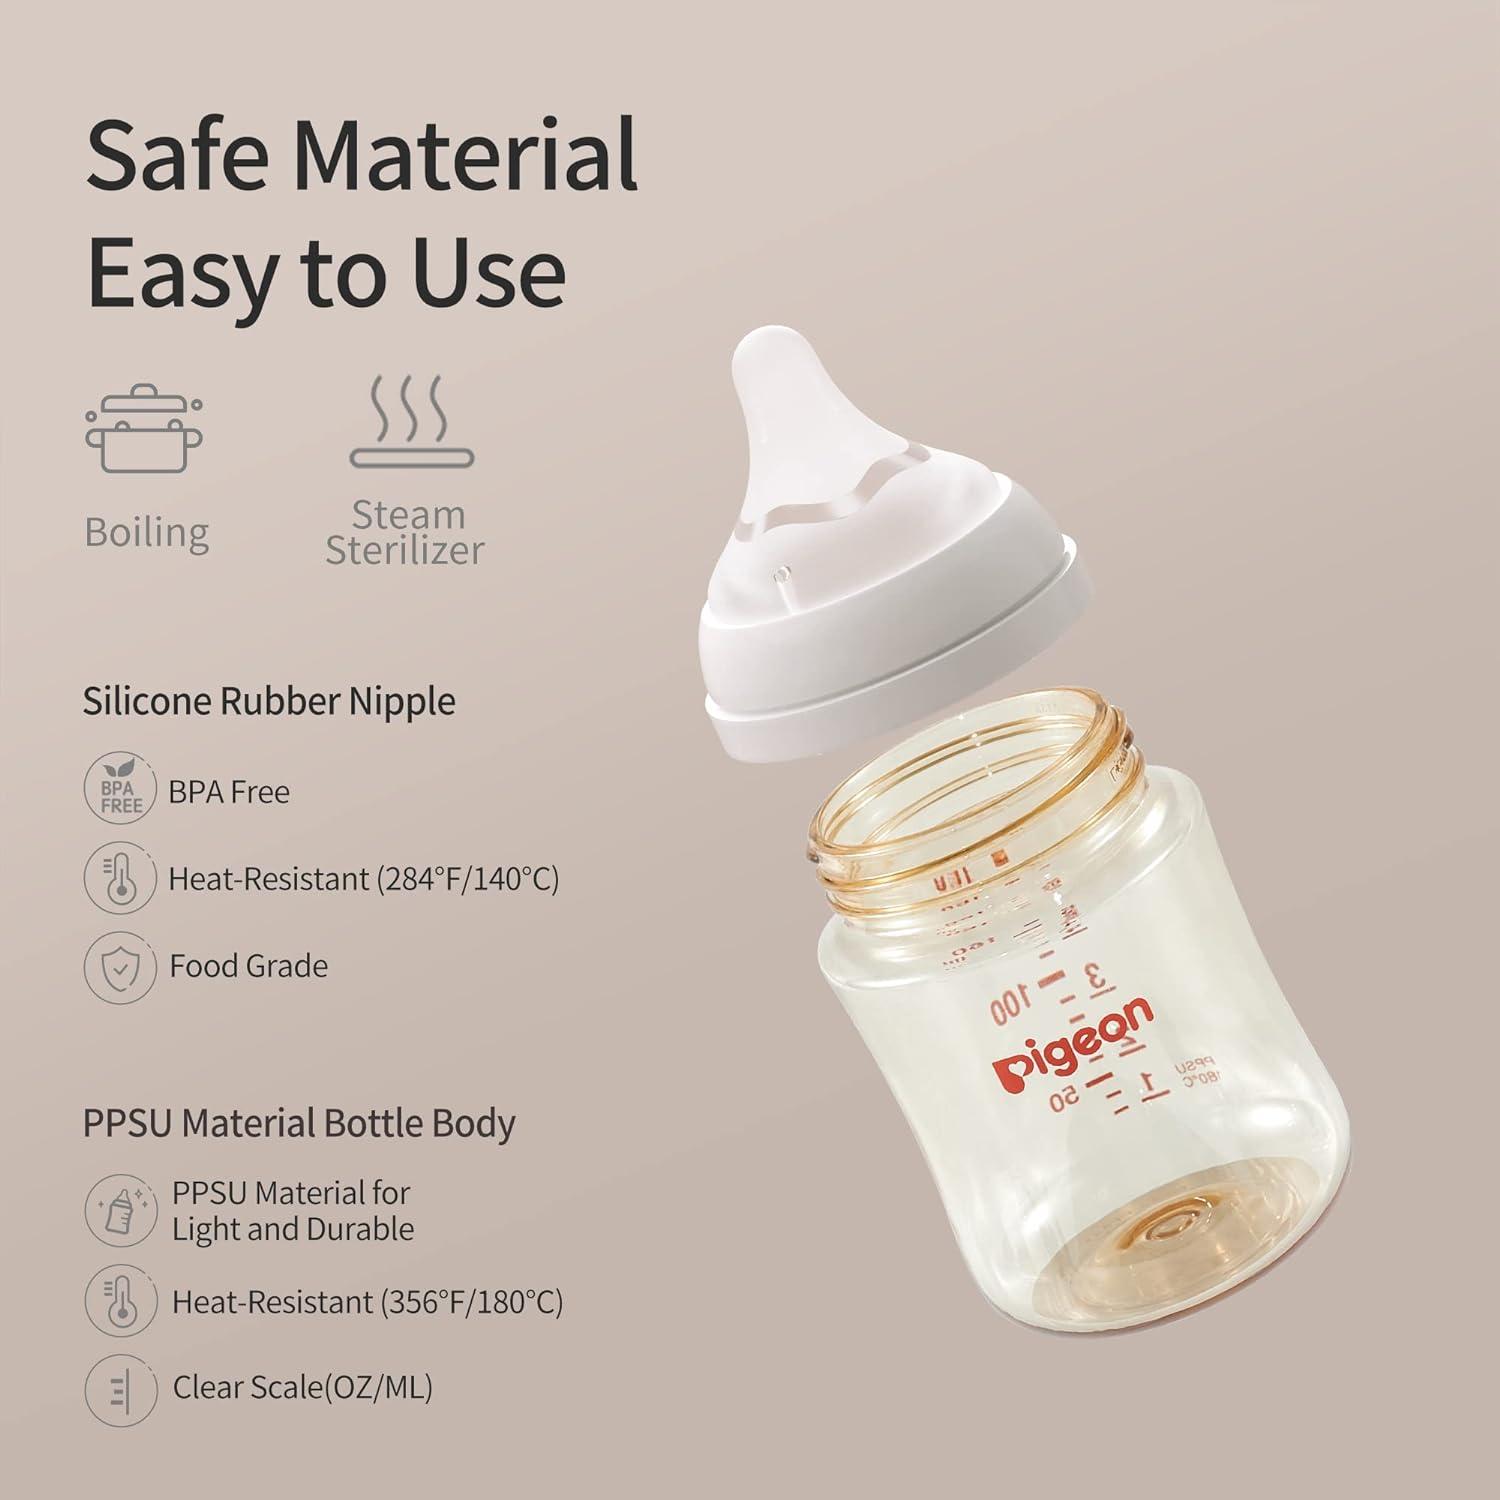 Baby Bottles and Accessories Cleanser - Pigeon Malaysia